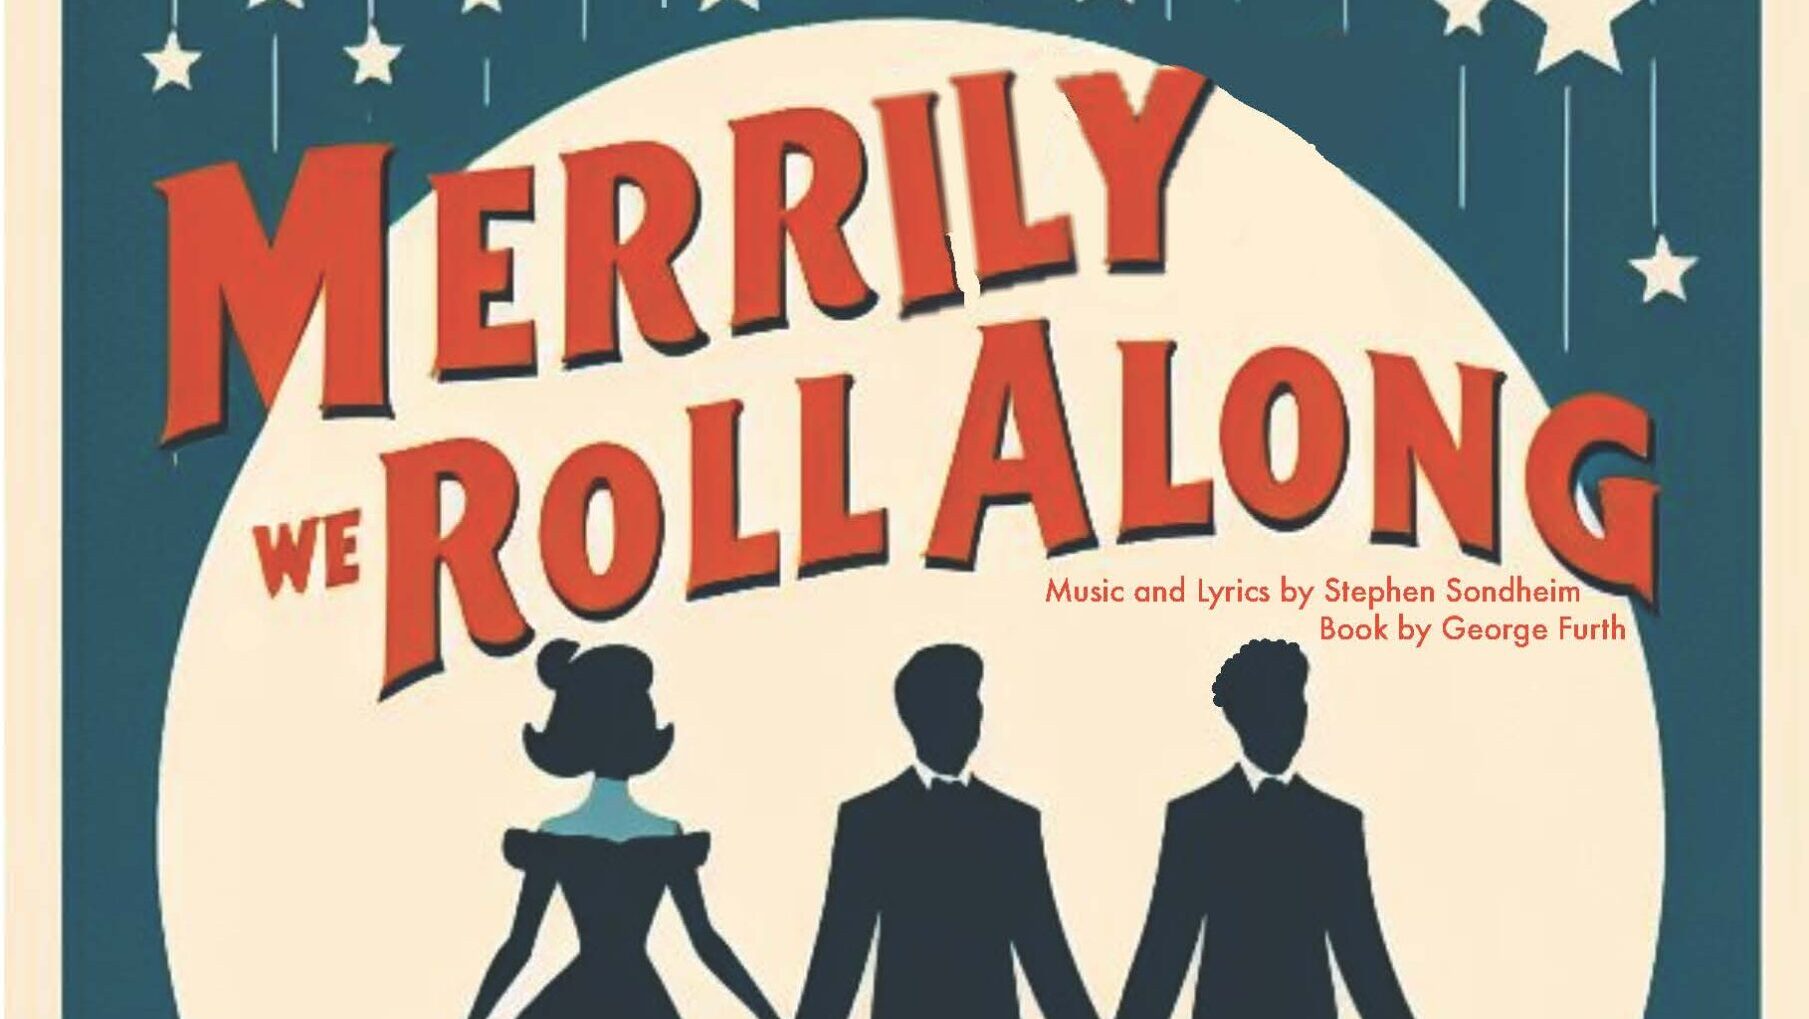 Merrily We Roll Along Music Society poster